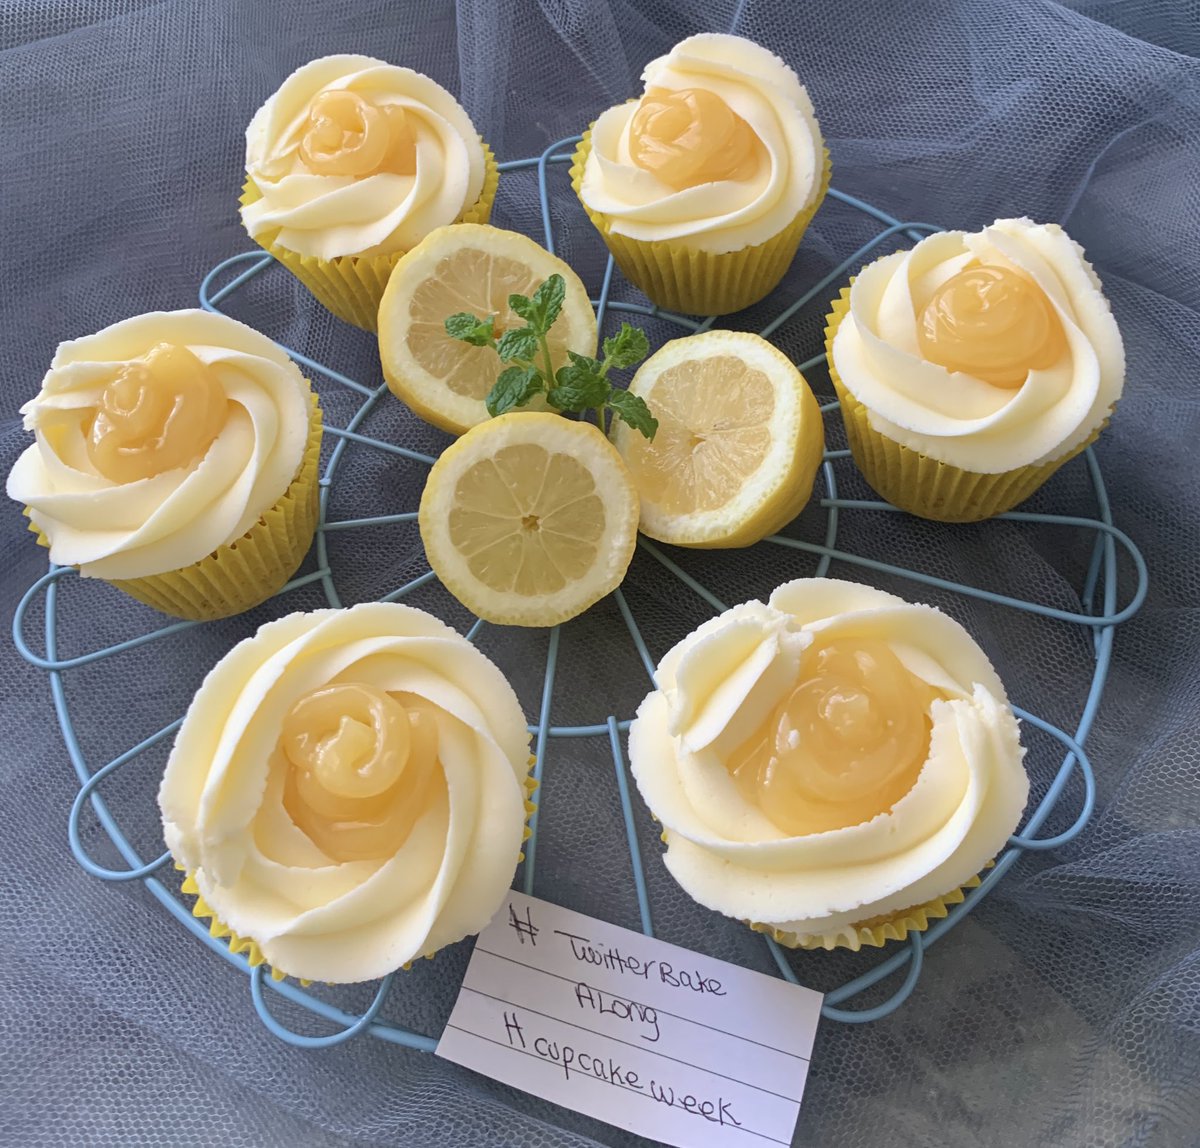 I’ve made lemon curd cupcakes in the hope they would bring some sunshine, and they did 🌞🌞🌞🌞🌞#twitterbakealong #cupcakeweek @thebakingnanna1 @Rob_C_Allen @FirsTMaster 🌞🌞🌞🌞🌞